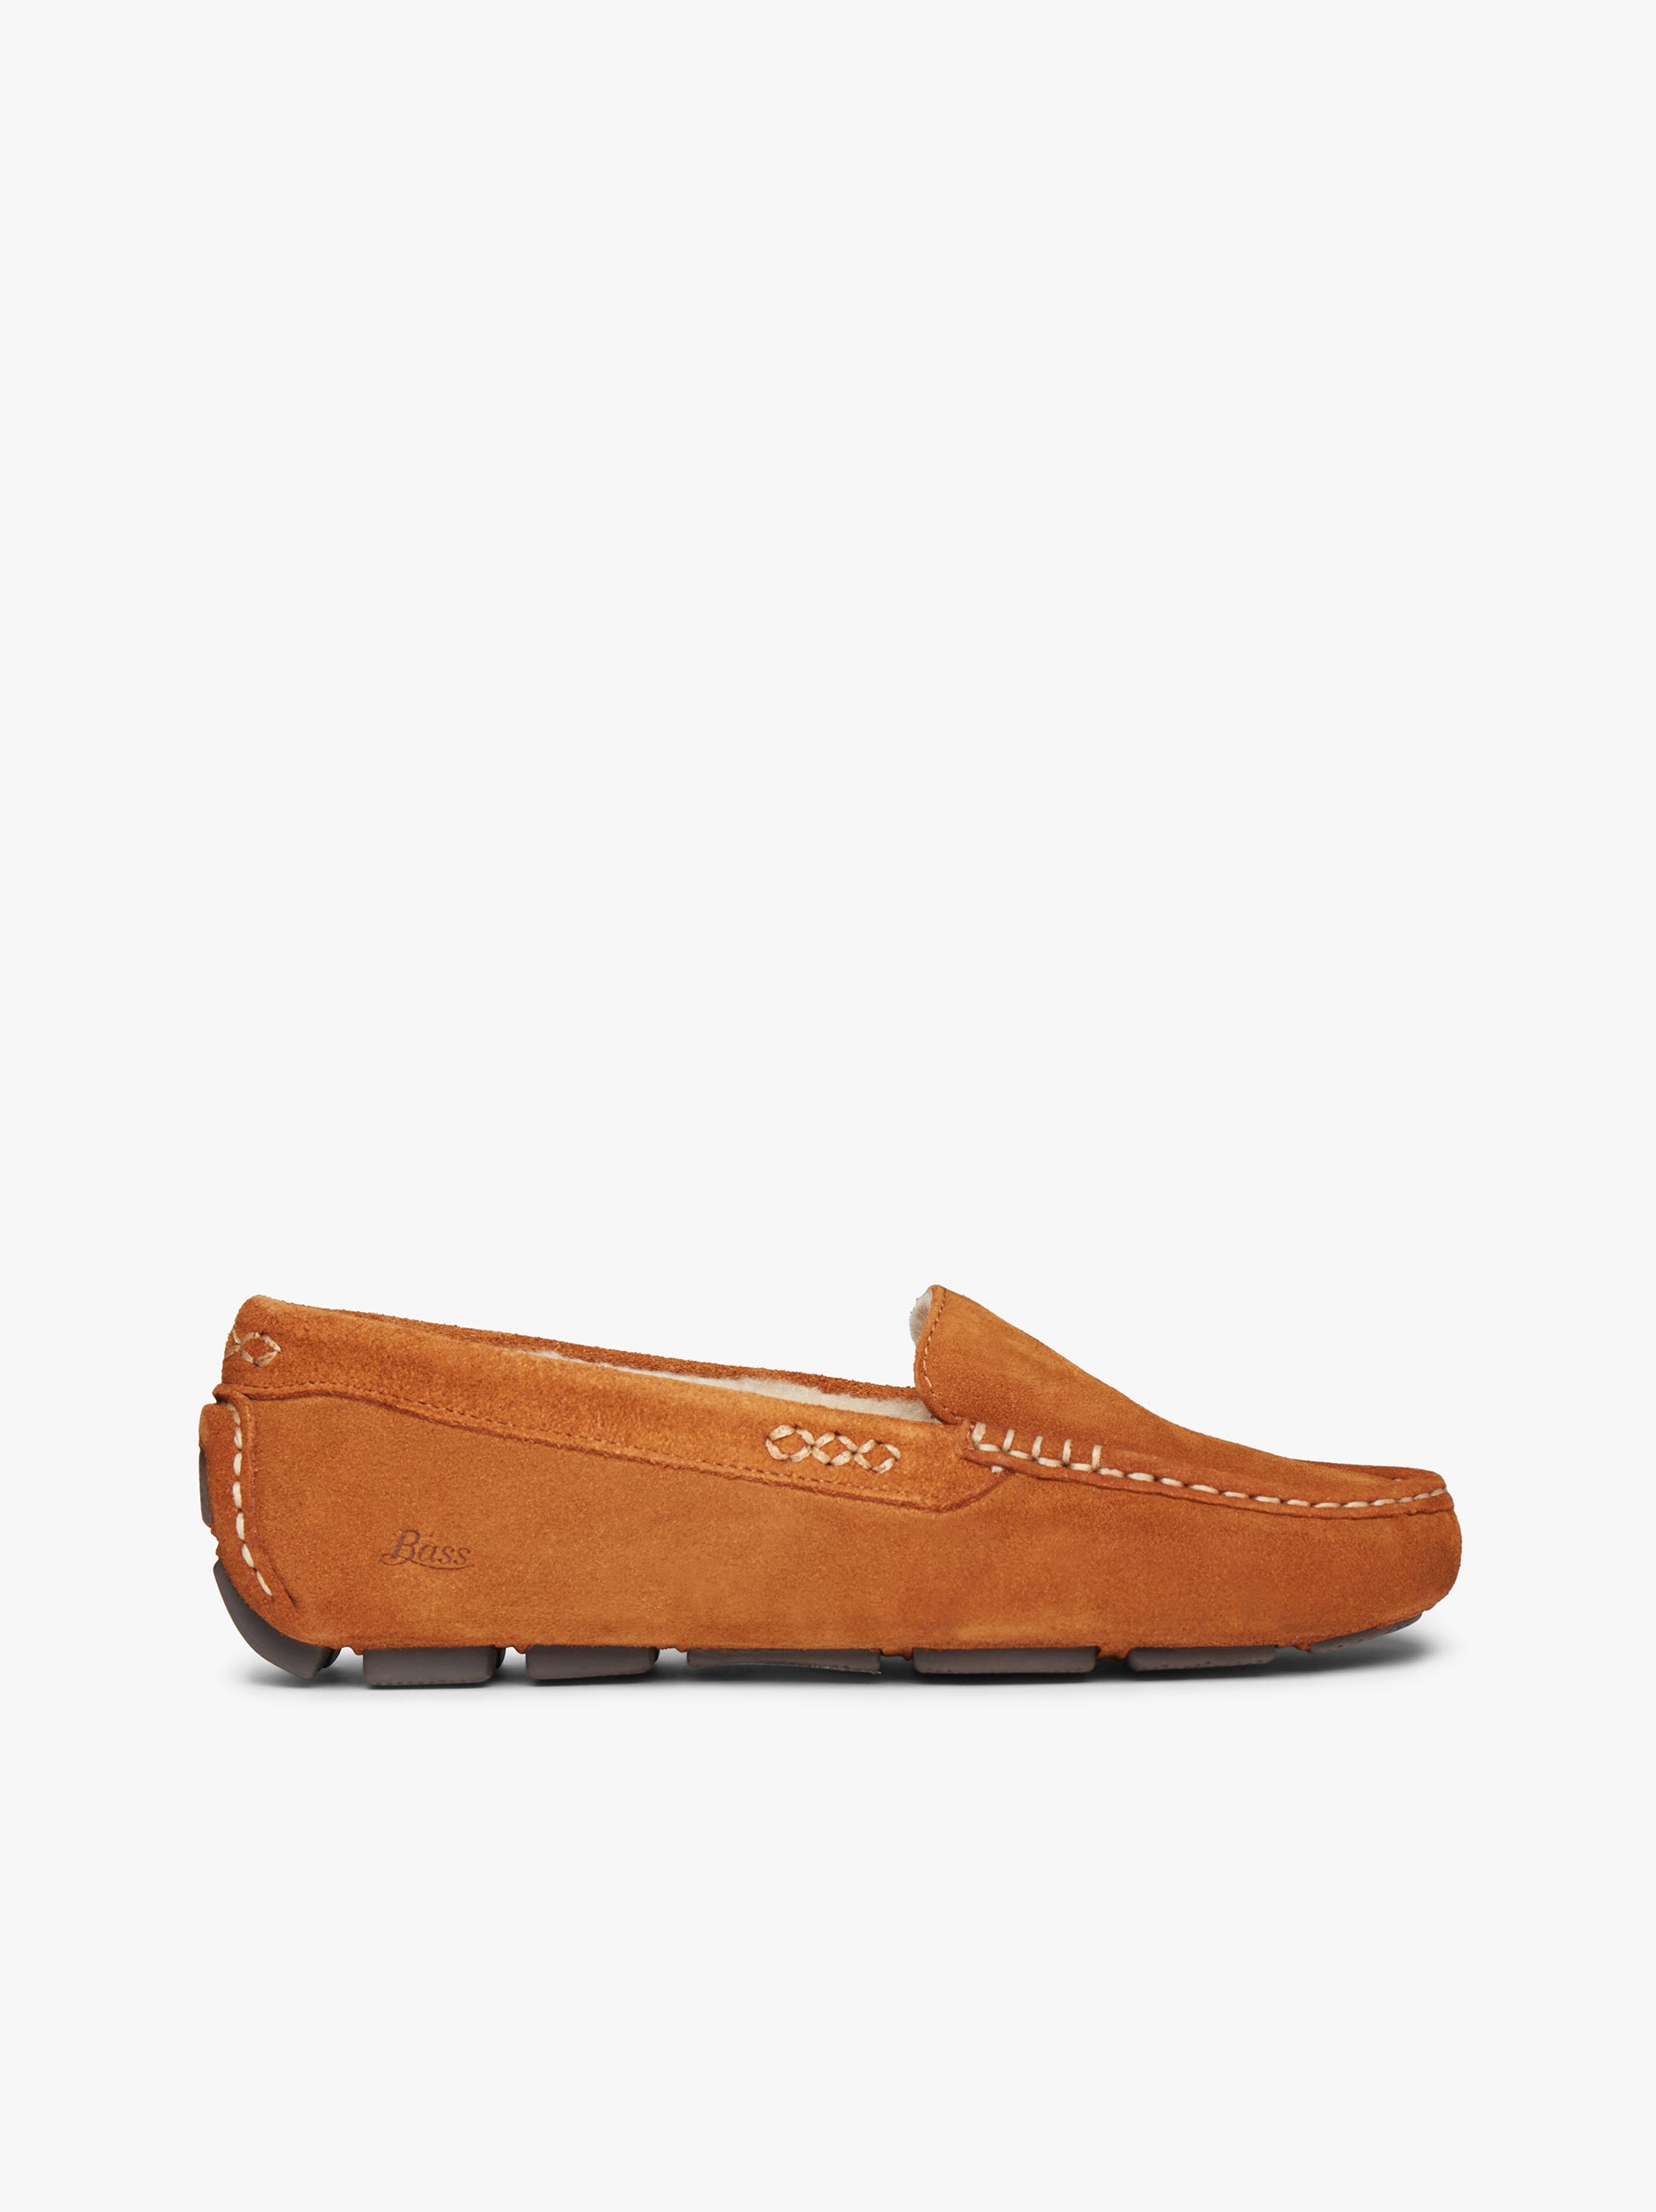 Moccasin Slippers - Wool - Suede Sole - Snugrugs